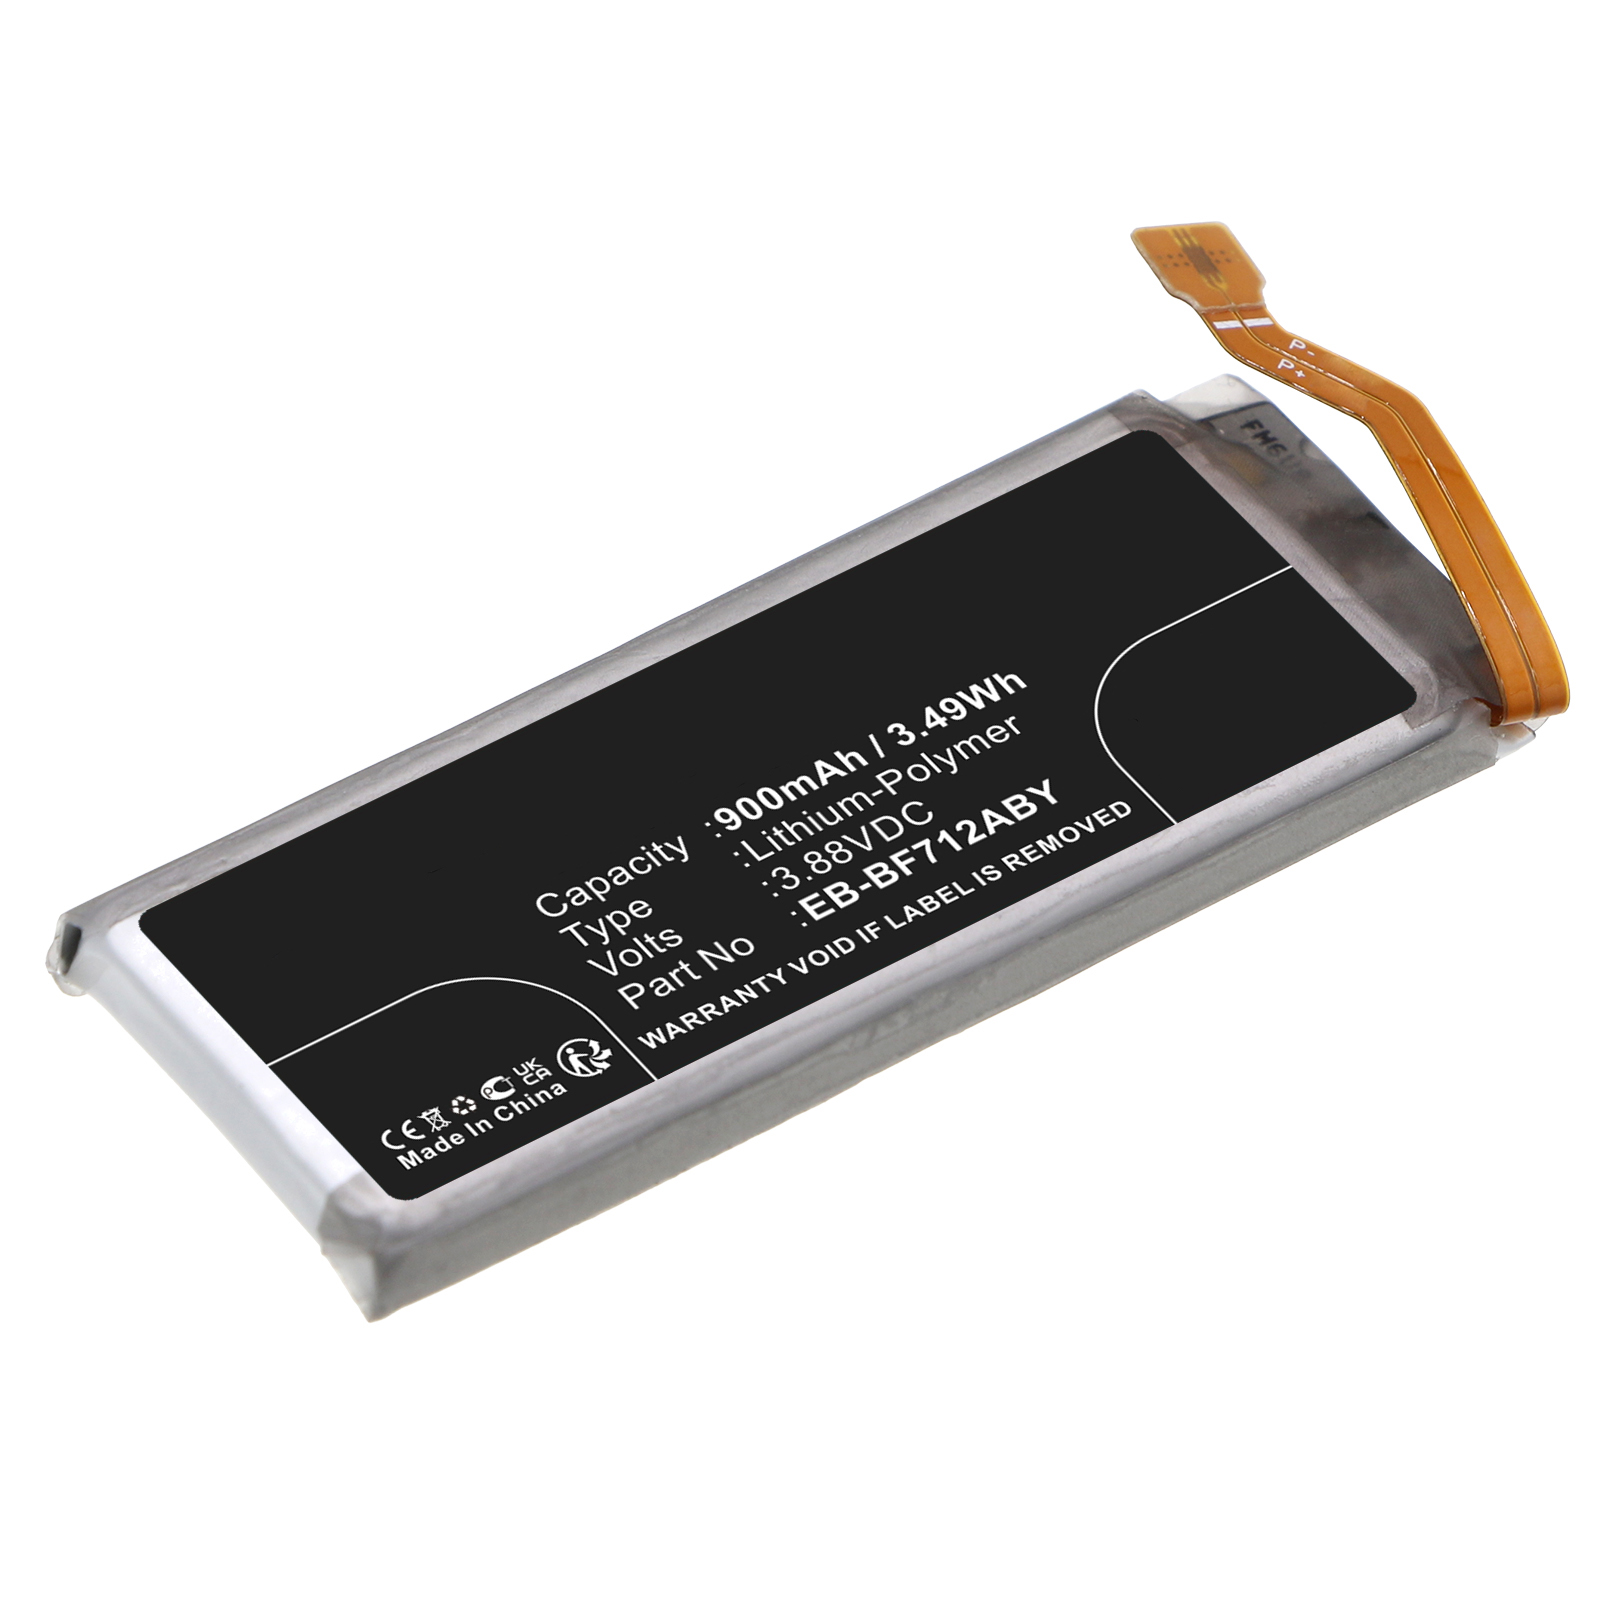 Synergy Digital Cell Phone Battery, Compatible with Samsung EB-BF712ABY Cell Phone Battery (Li-Pol, 3.88V, 900mAh)